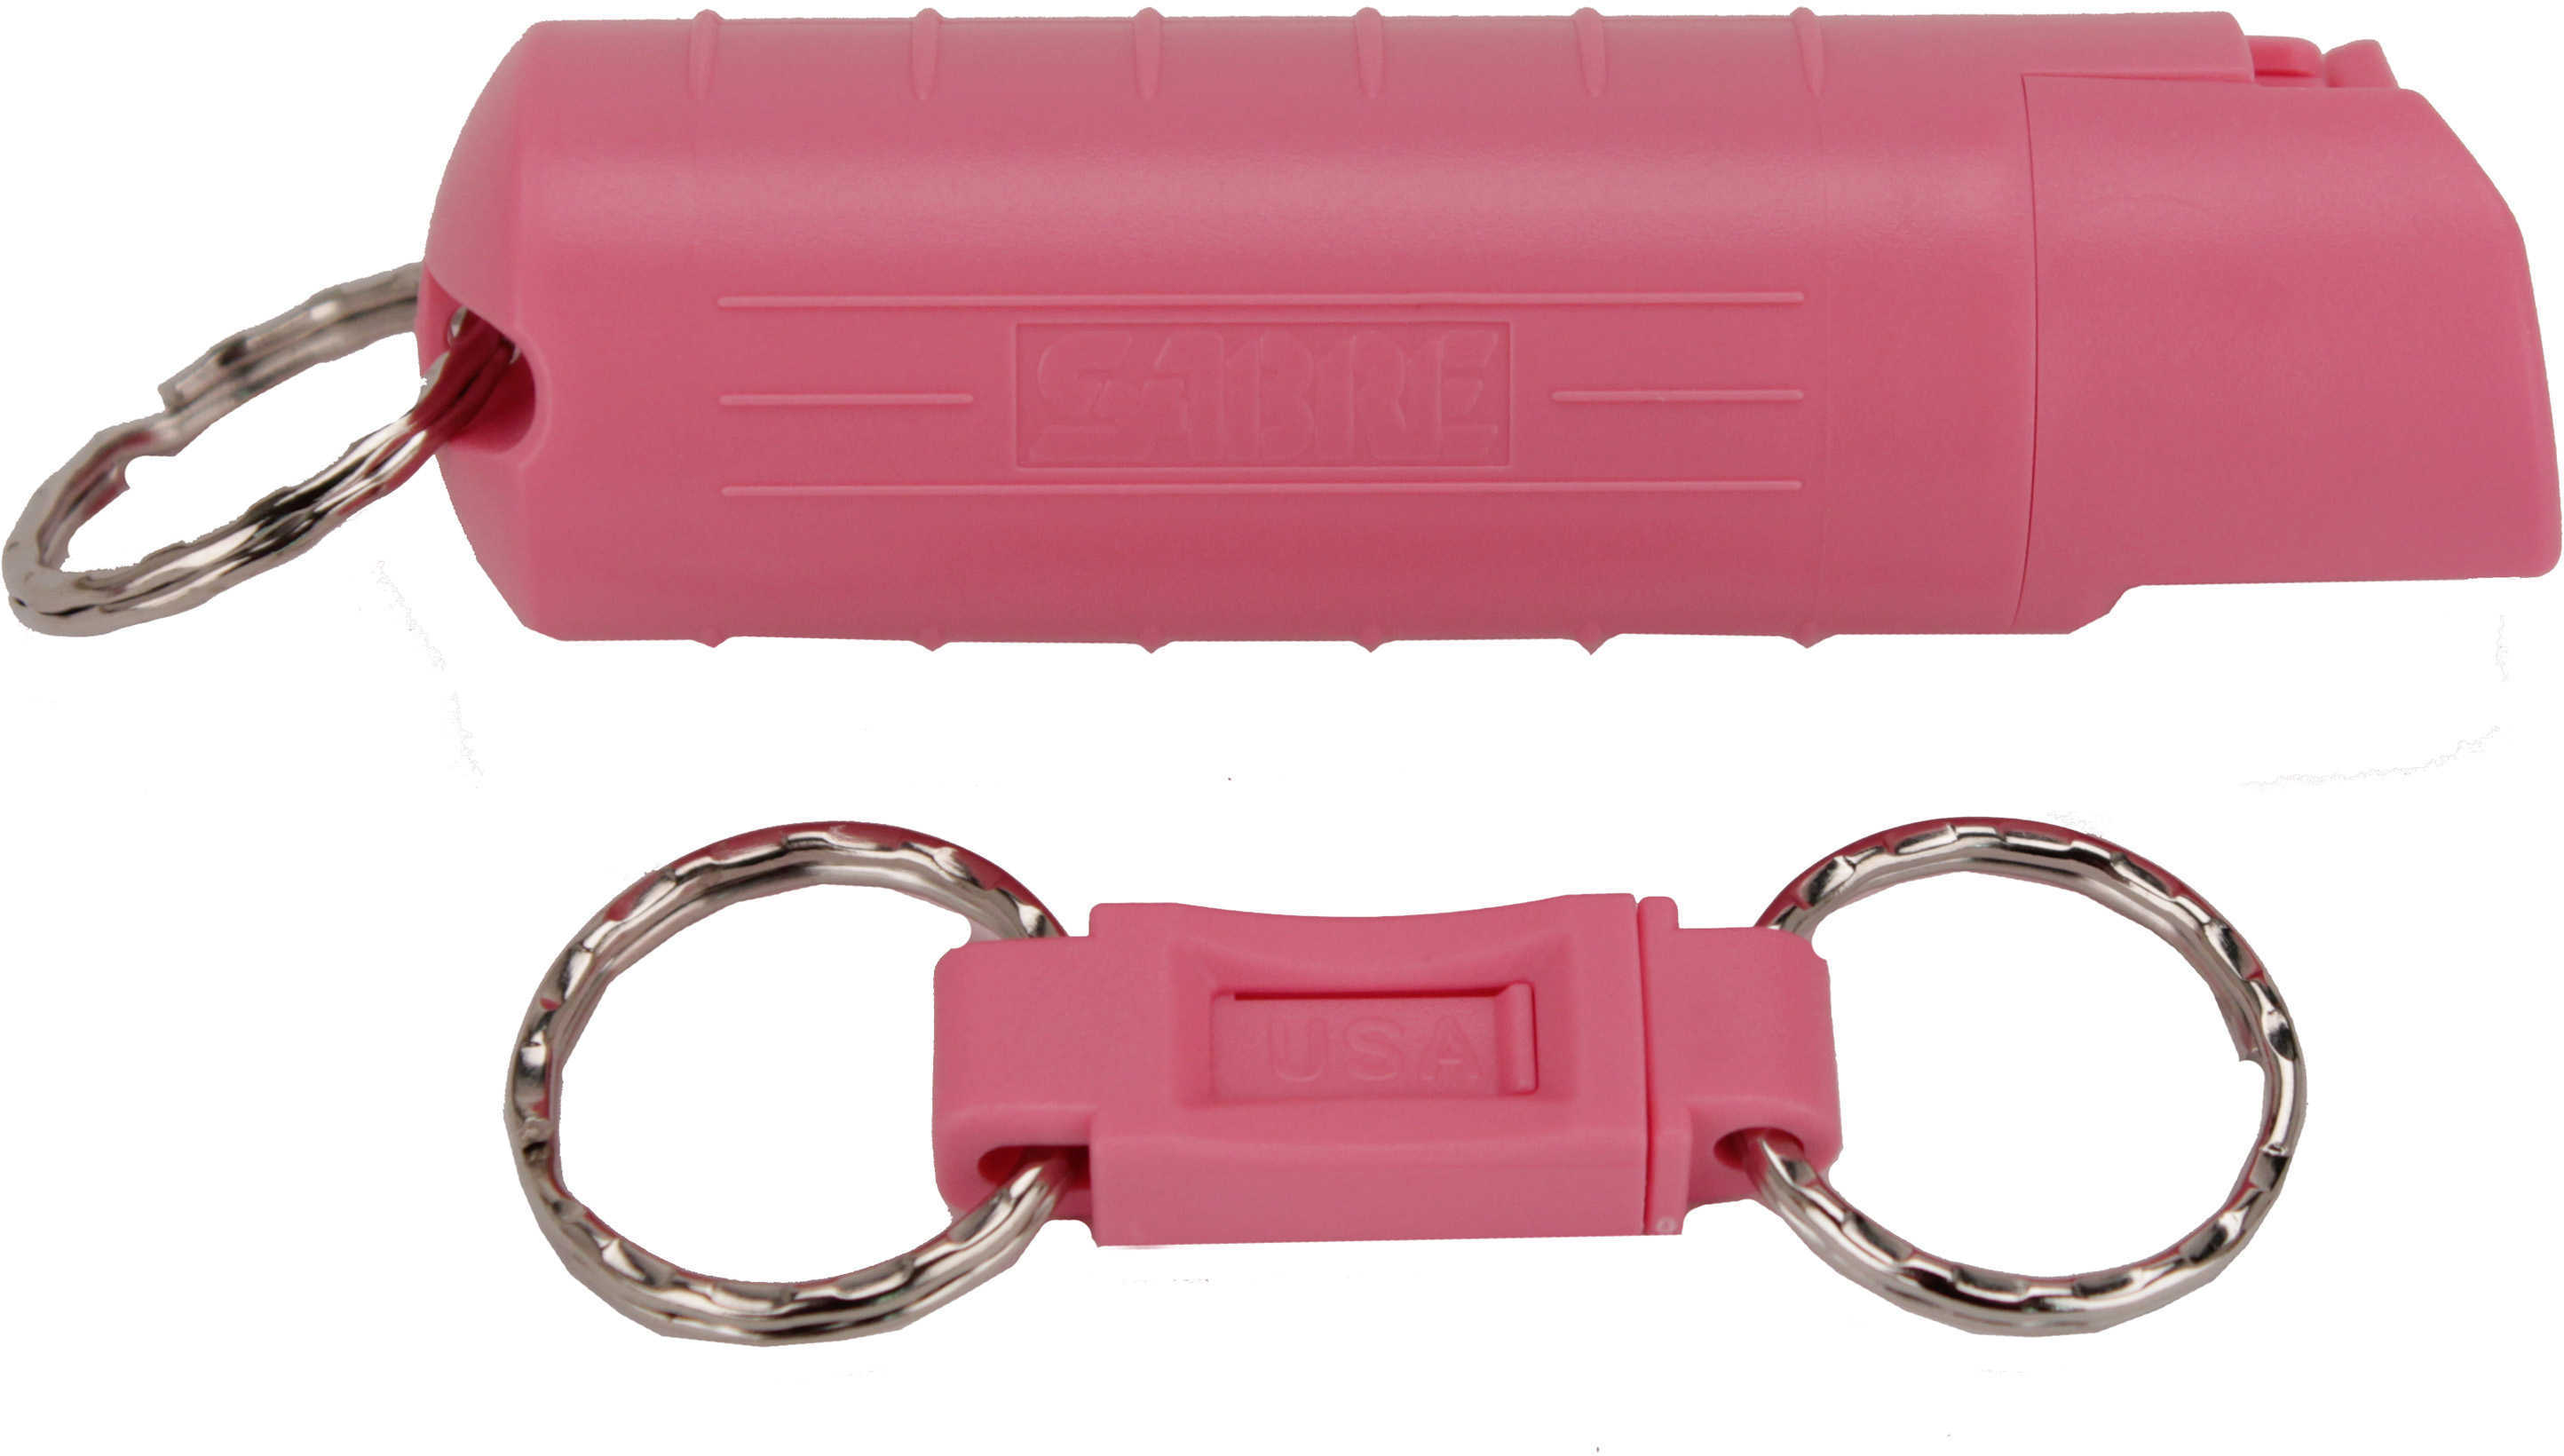 Sabre Red Keychain Pepper Spray Pink Hardcase with Quick Release Key Ring Model: HC-14-PK-US